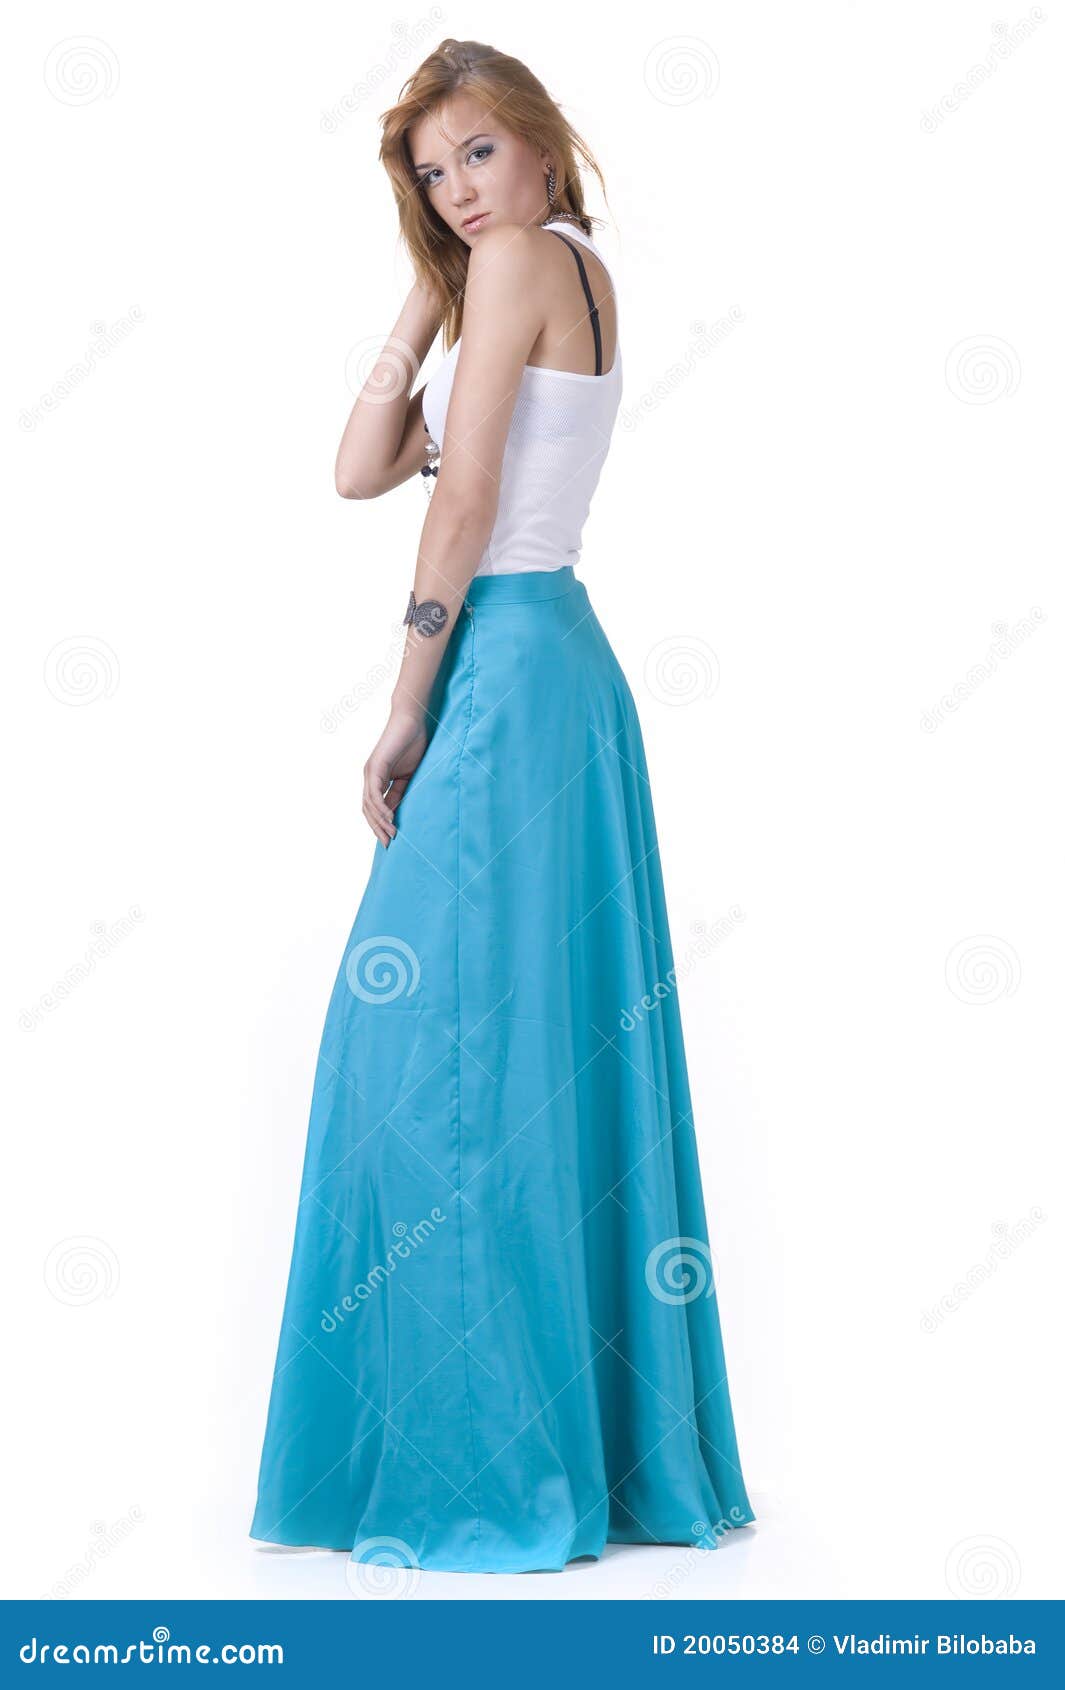 Poses ideas in long skirt | Spring outfits women, Fashion photography,  Photography poses